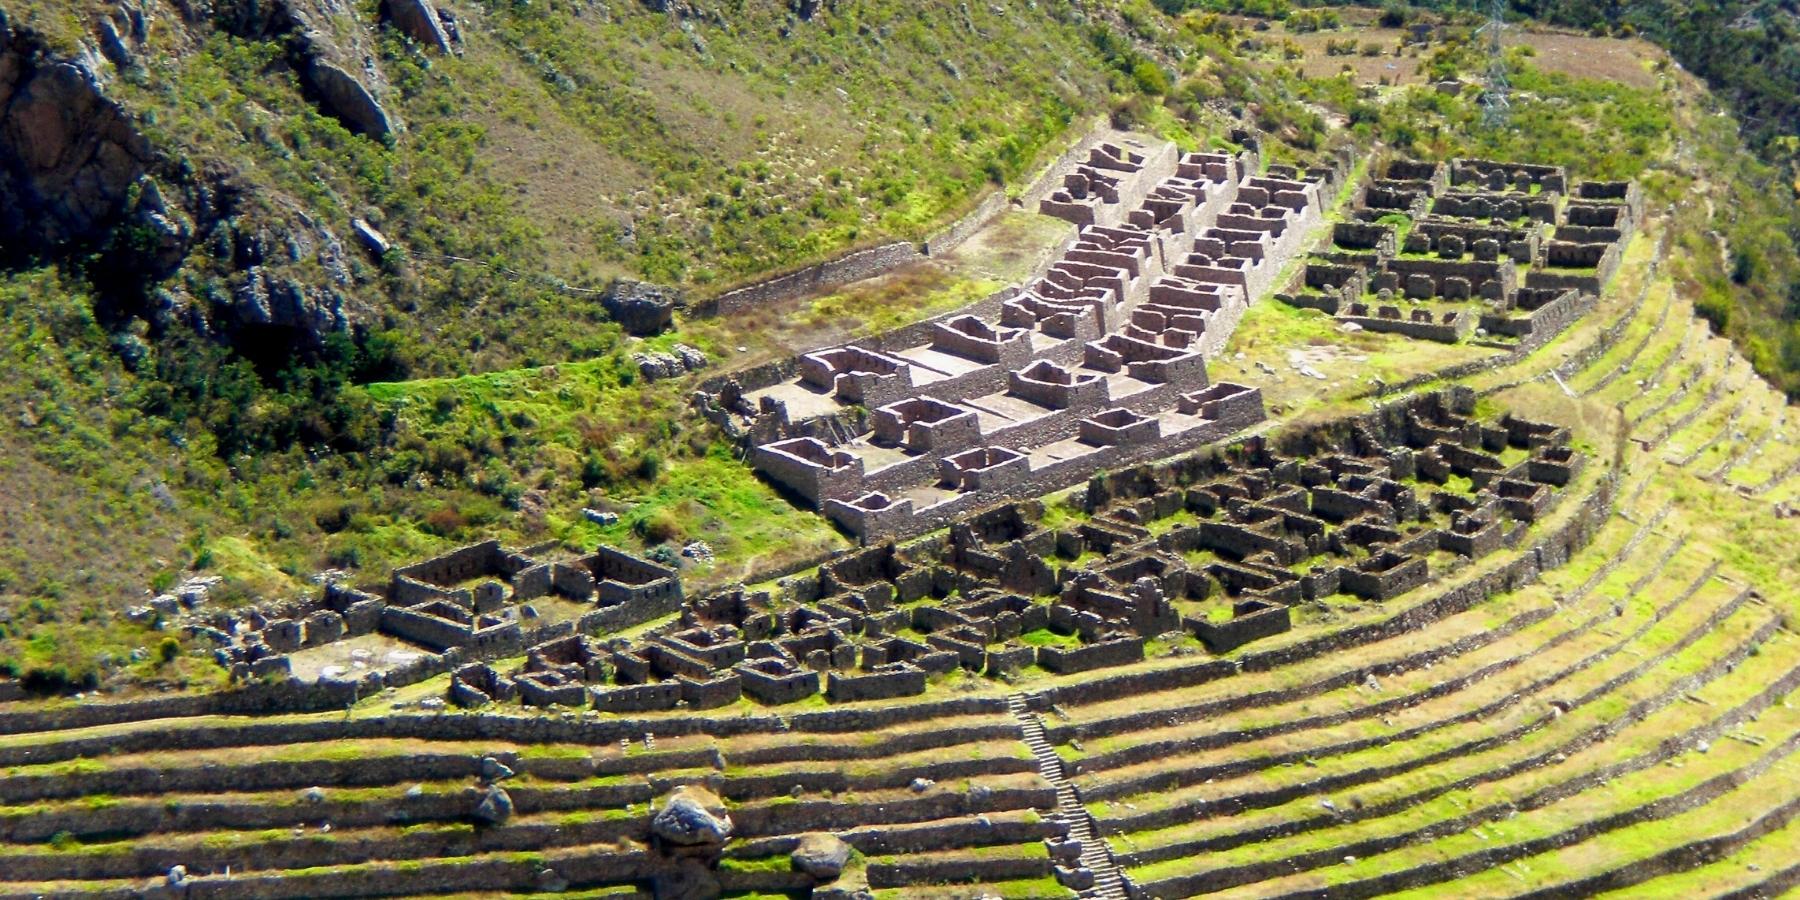 QUESTIONS ABOUT THE CLIMATE AND SEASON OF THE INCA TRAIL TO MACHU PICCHU